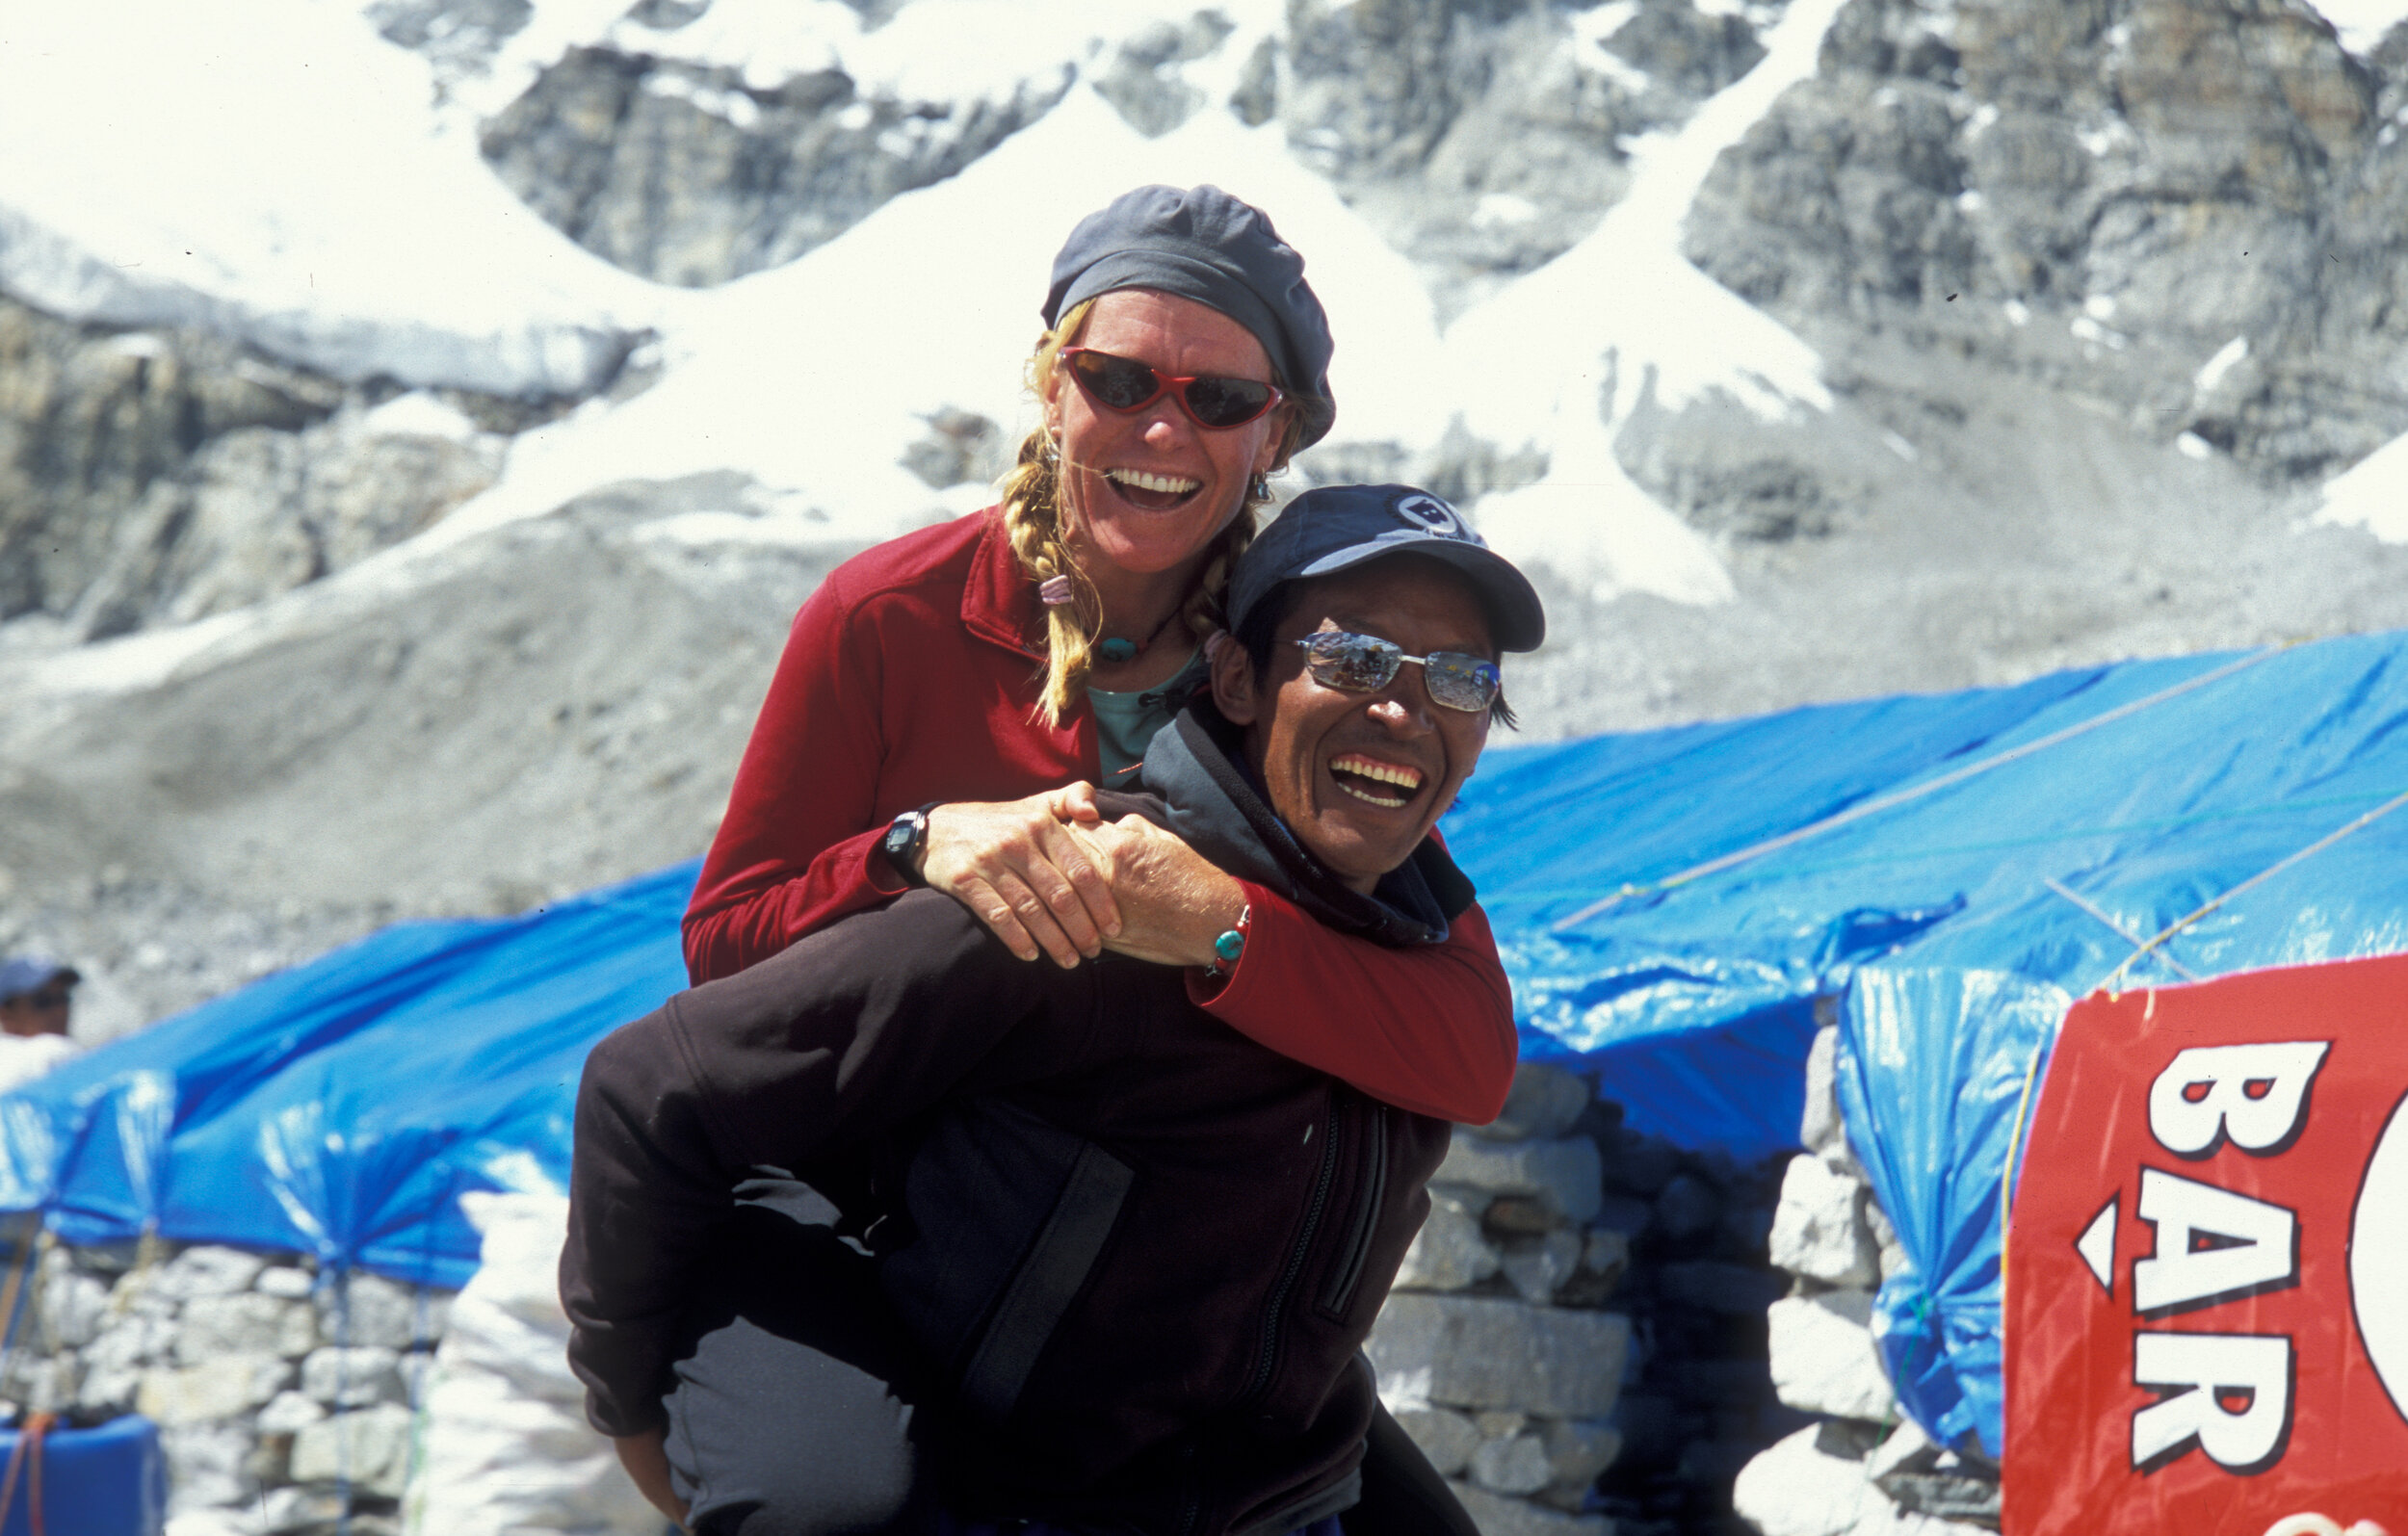  Maegan sharing a laugh and good times with one of our favourite climbing Sherpa, Lakpa Galygze, Everest Base Camp 2003 Photo Wally Berg 